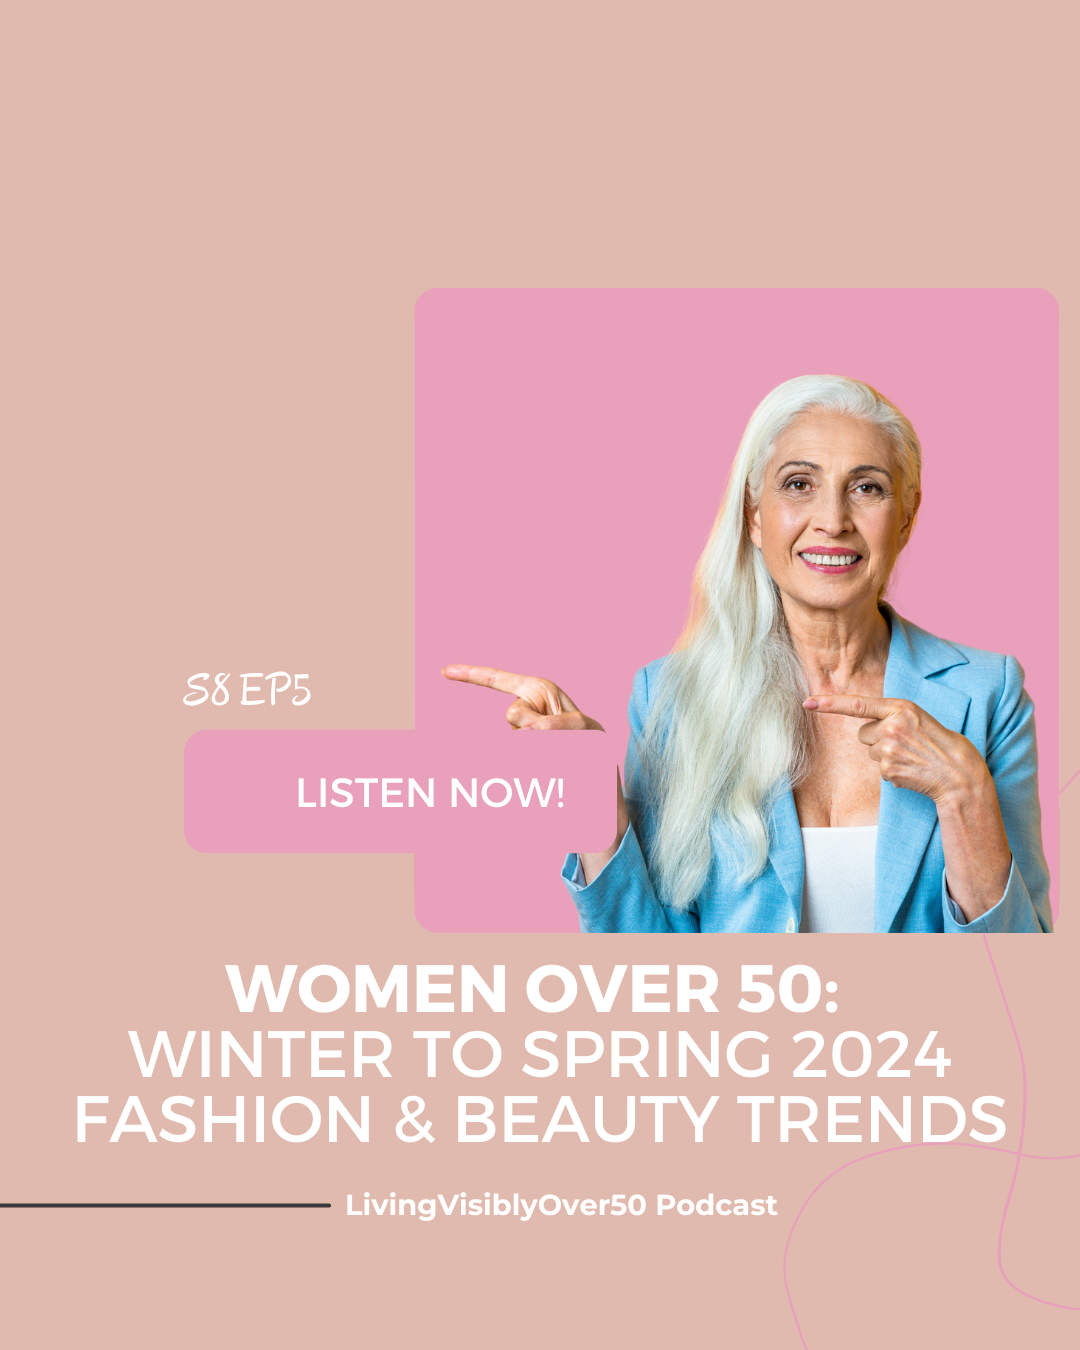 Living Visibly Over 50 podcast. Women Over 50: Winter to Spring 2024 Fashion & Beauty Trends.